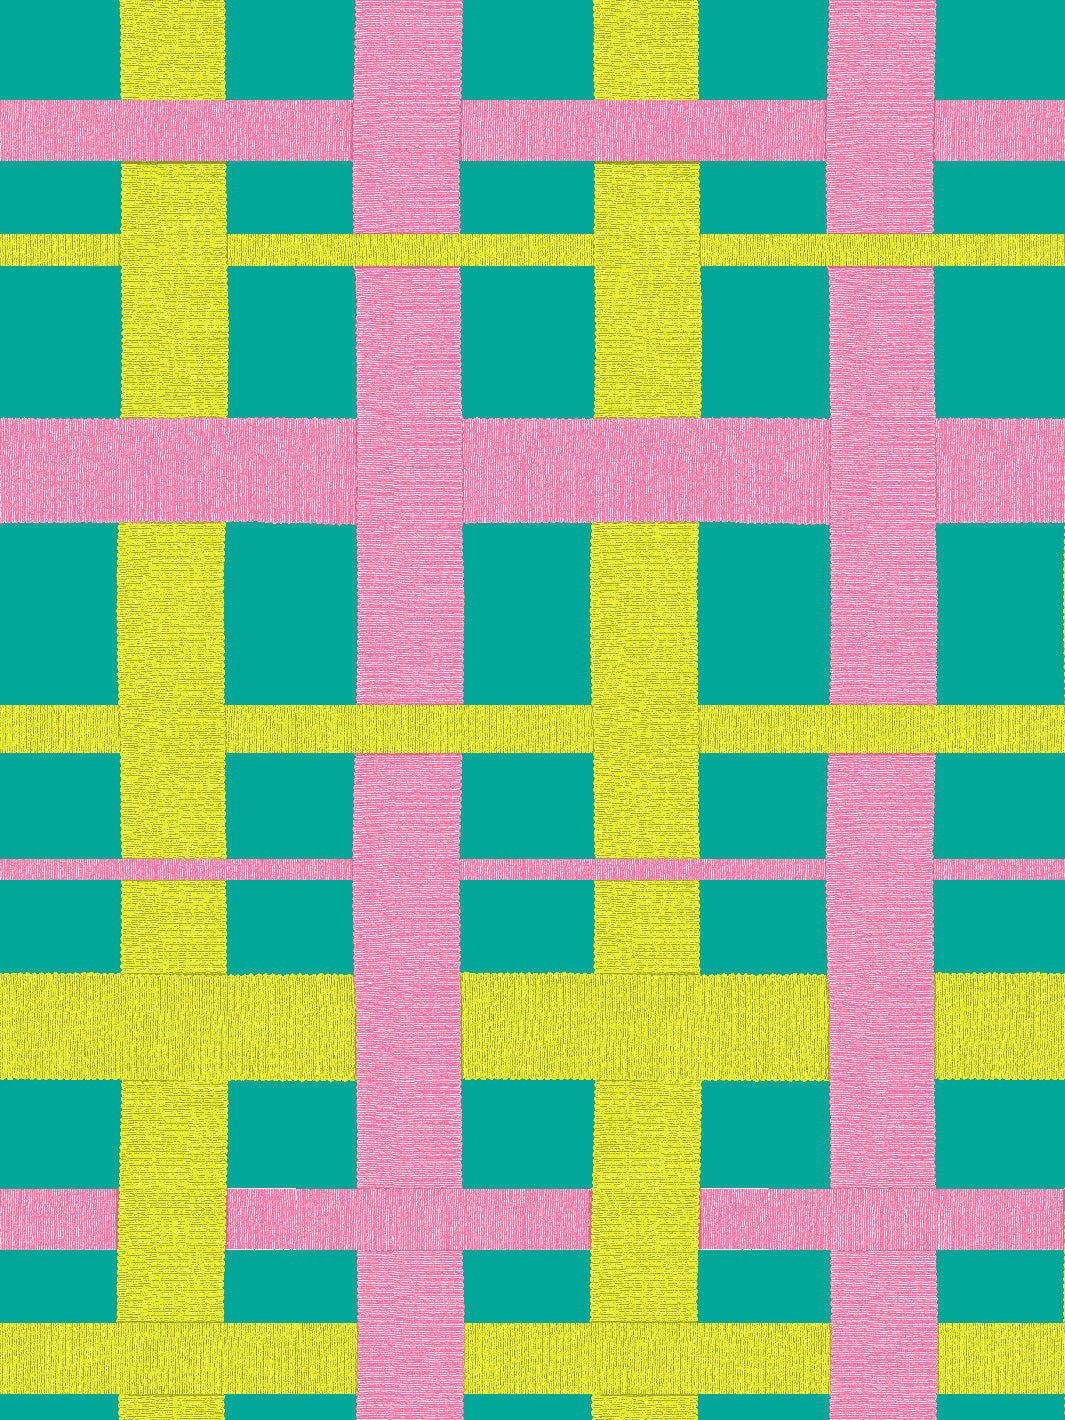 'Crosstown Plaid' Wallpaper by Sarah Jessica Parker - Citron on Teal